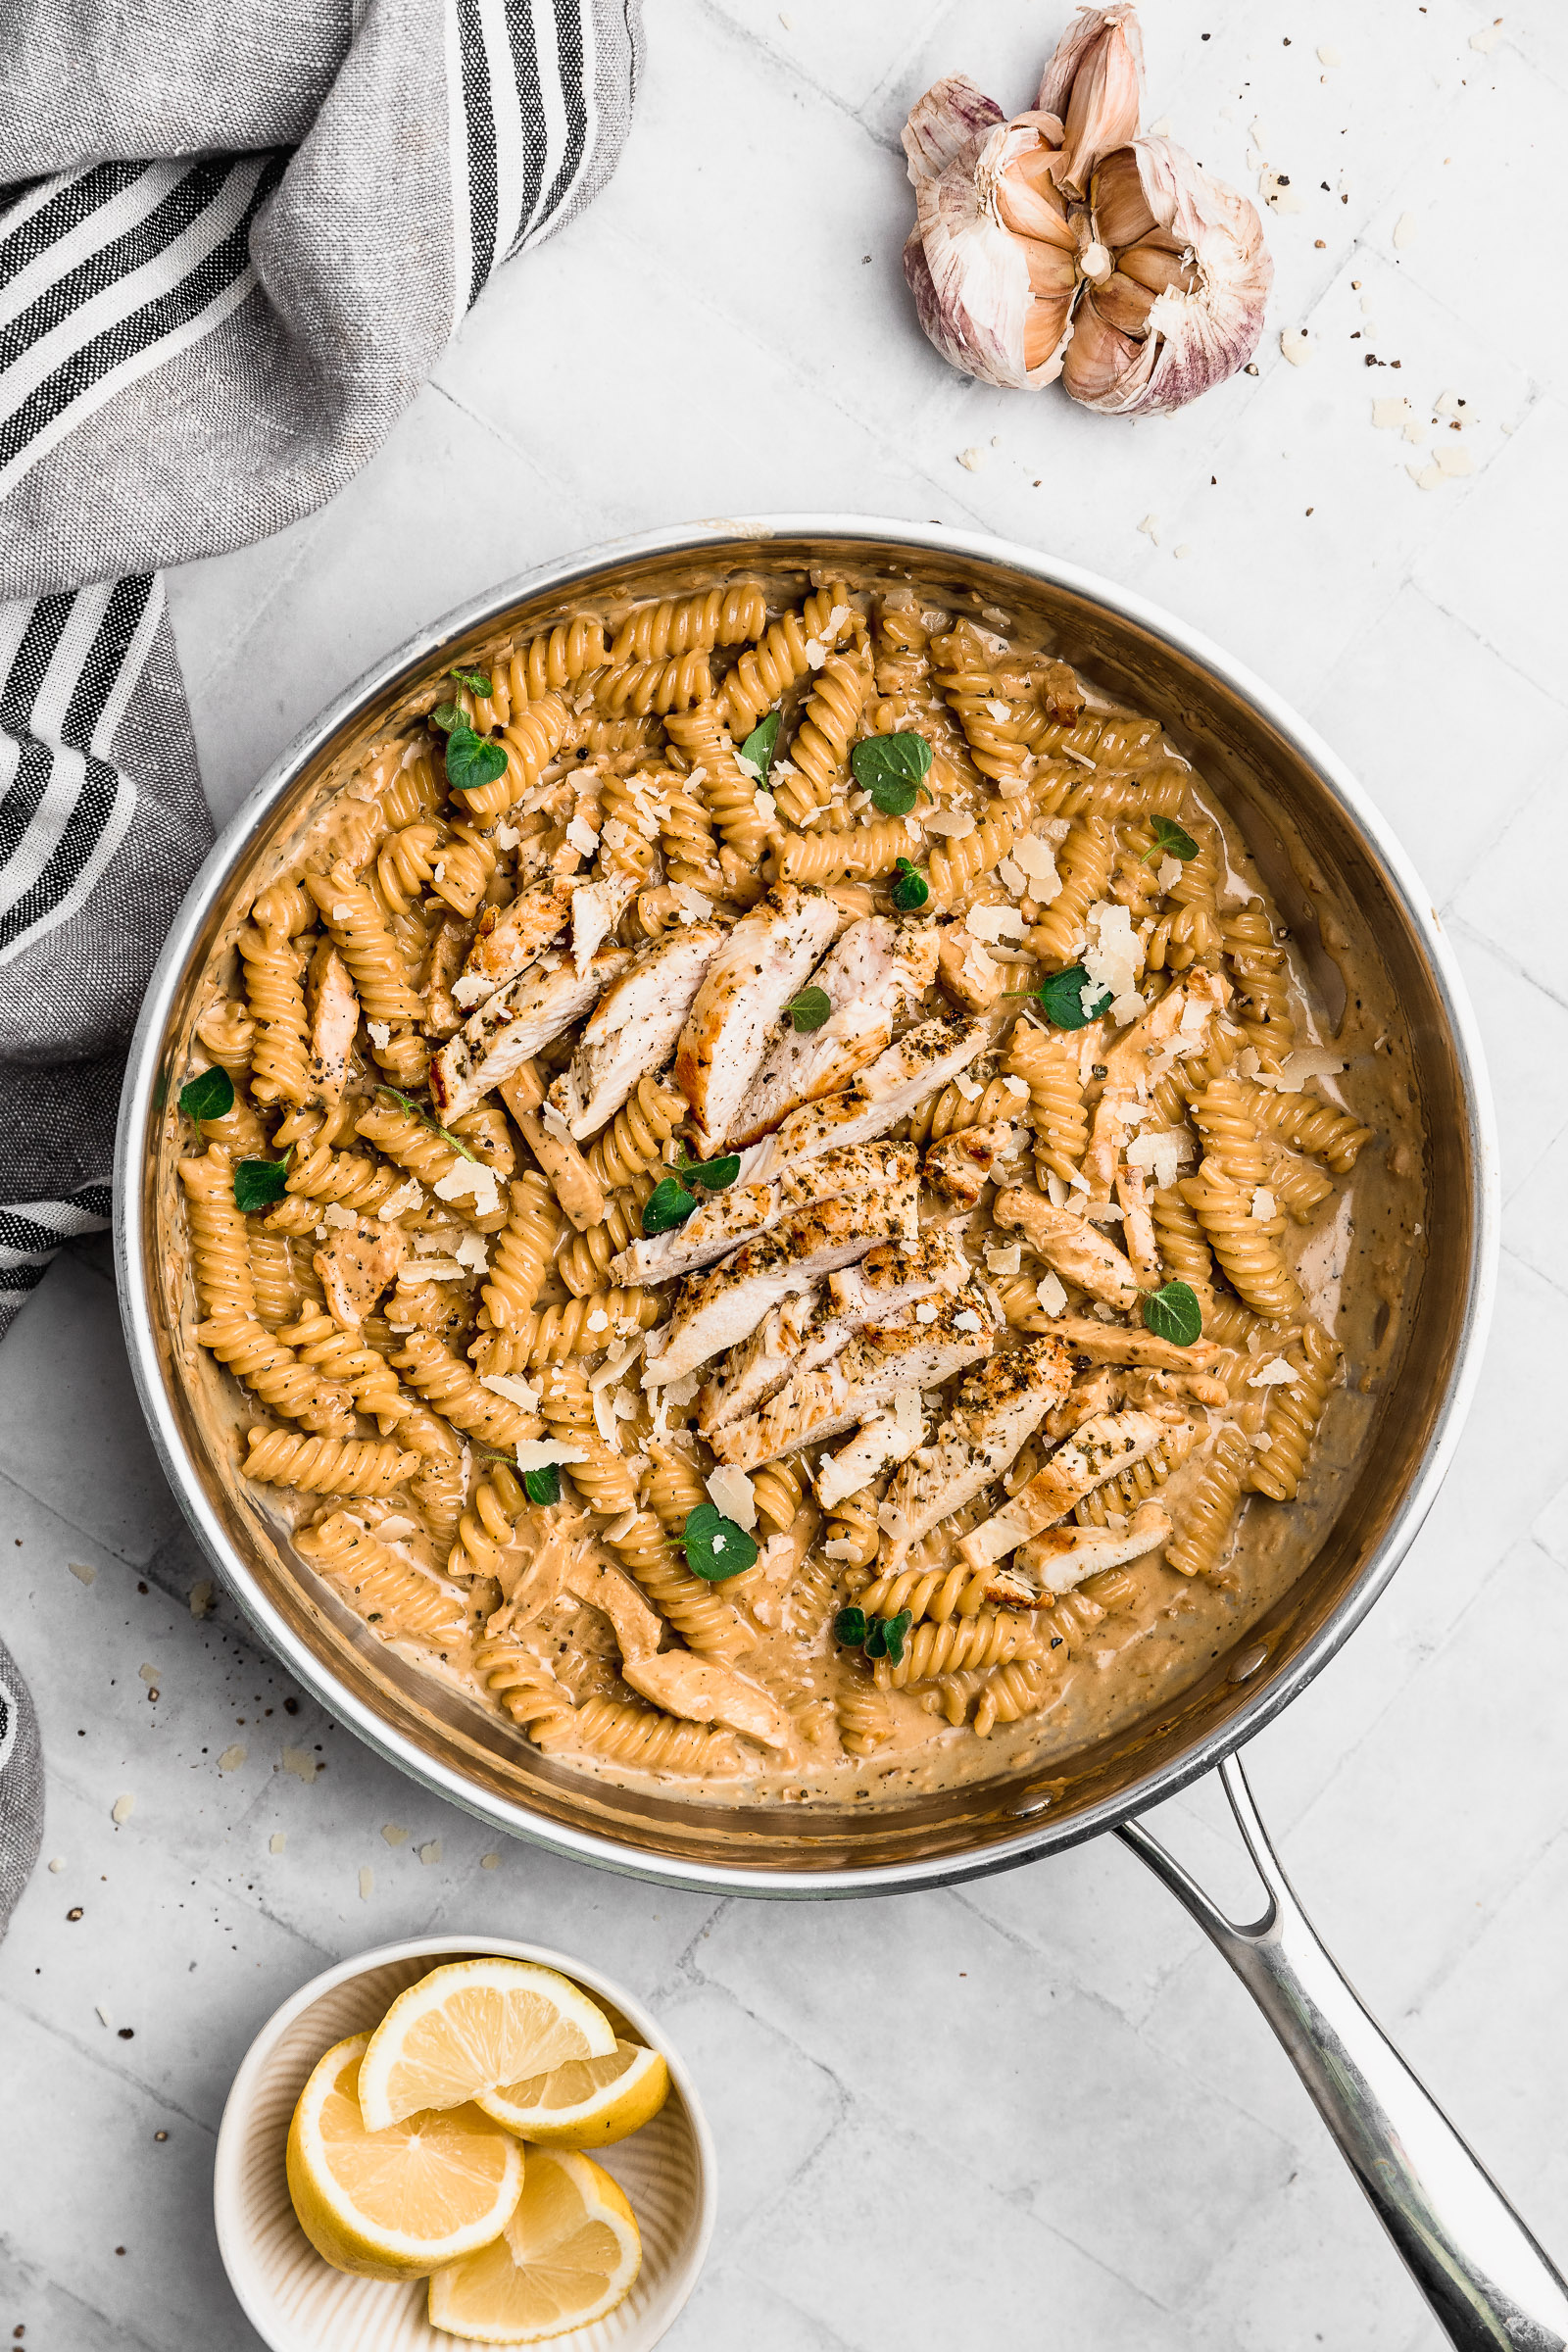 Top view of Garlic Parmesan Chicken Pasta contained in the pan where it was made. You can see the glossy and creamy sauce, as well as the golden chicken slices, fresh oregano leaves and parmesan flakes